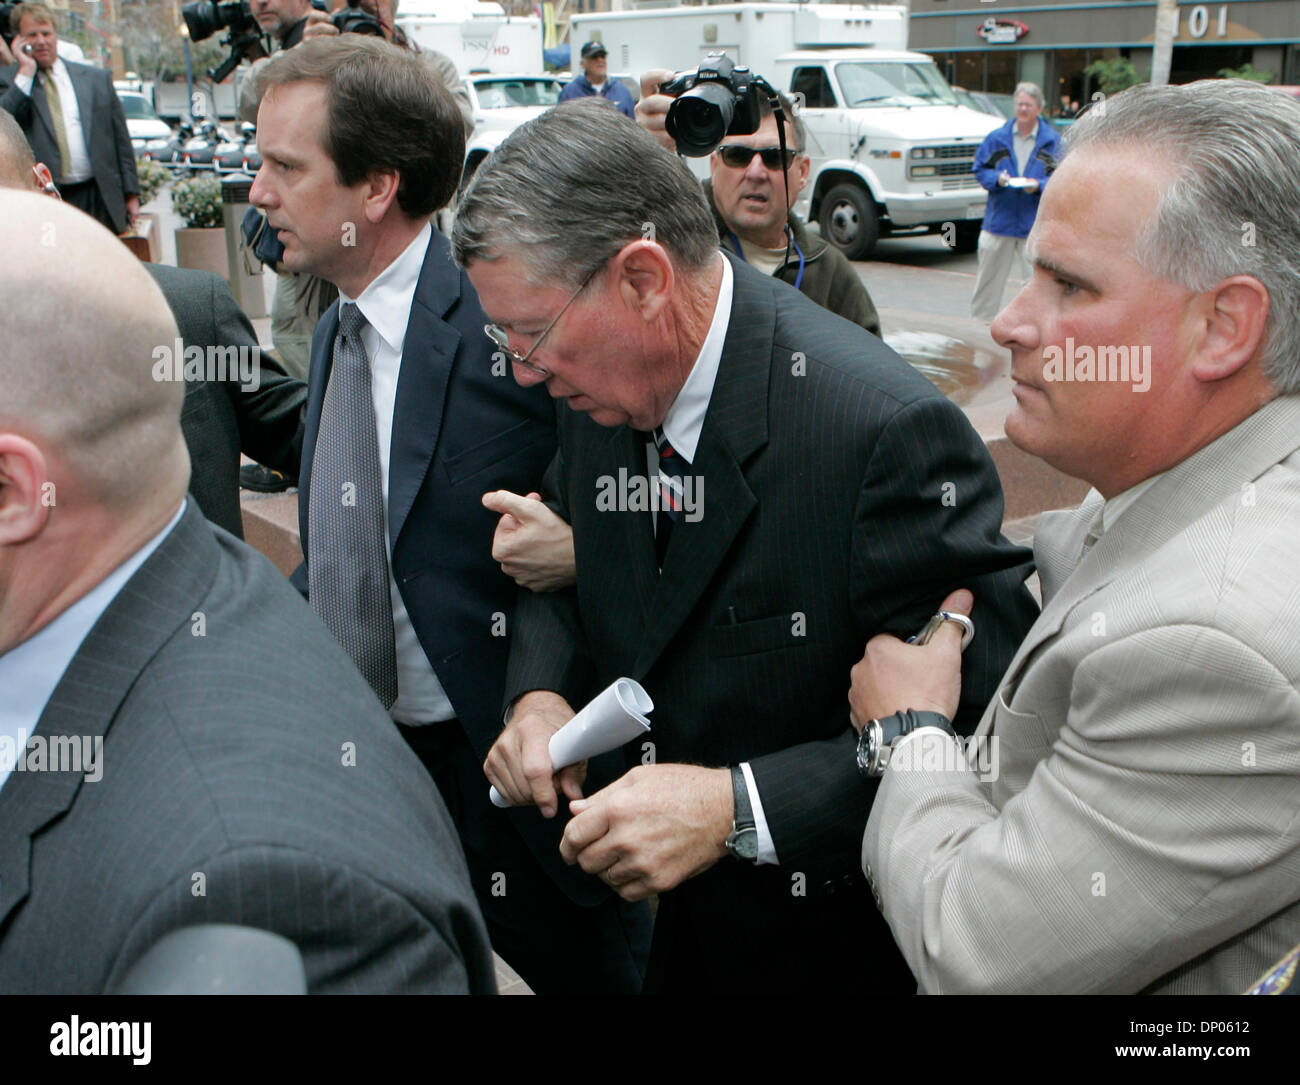 stang skive bh Mar 03, 2006; San Diego, CA, USA; Convicted congressman RANDY "DUKE"  CUNNINGHAM (R-50th) is escorted into the Federal Courthouse in San Diego,  California. CUNNINGHAM plead guilty to conspiracy and tax evasion for